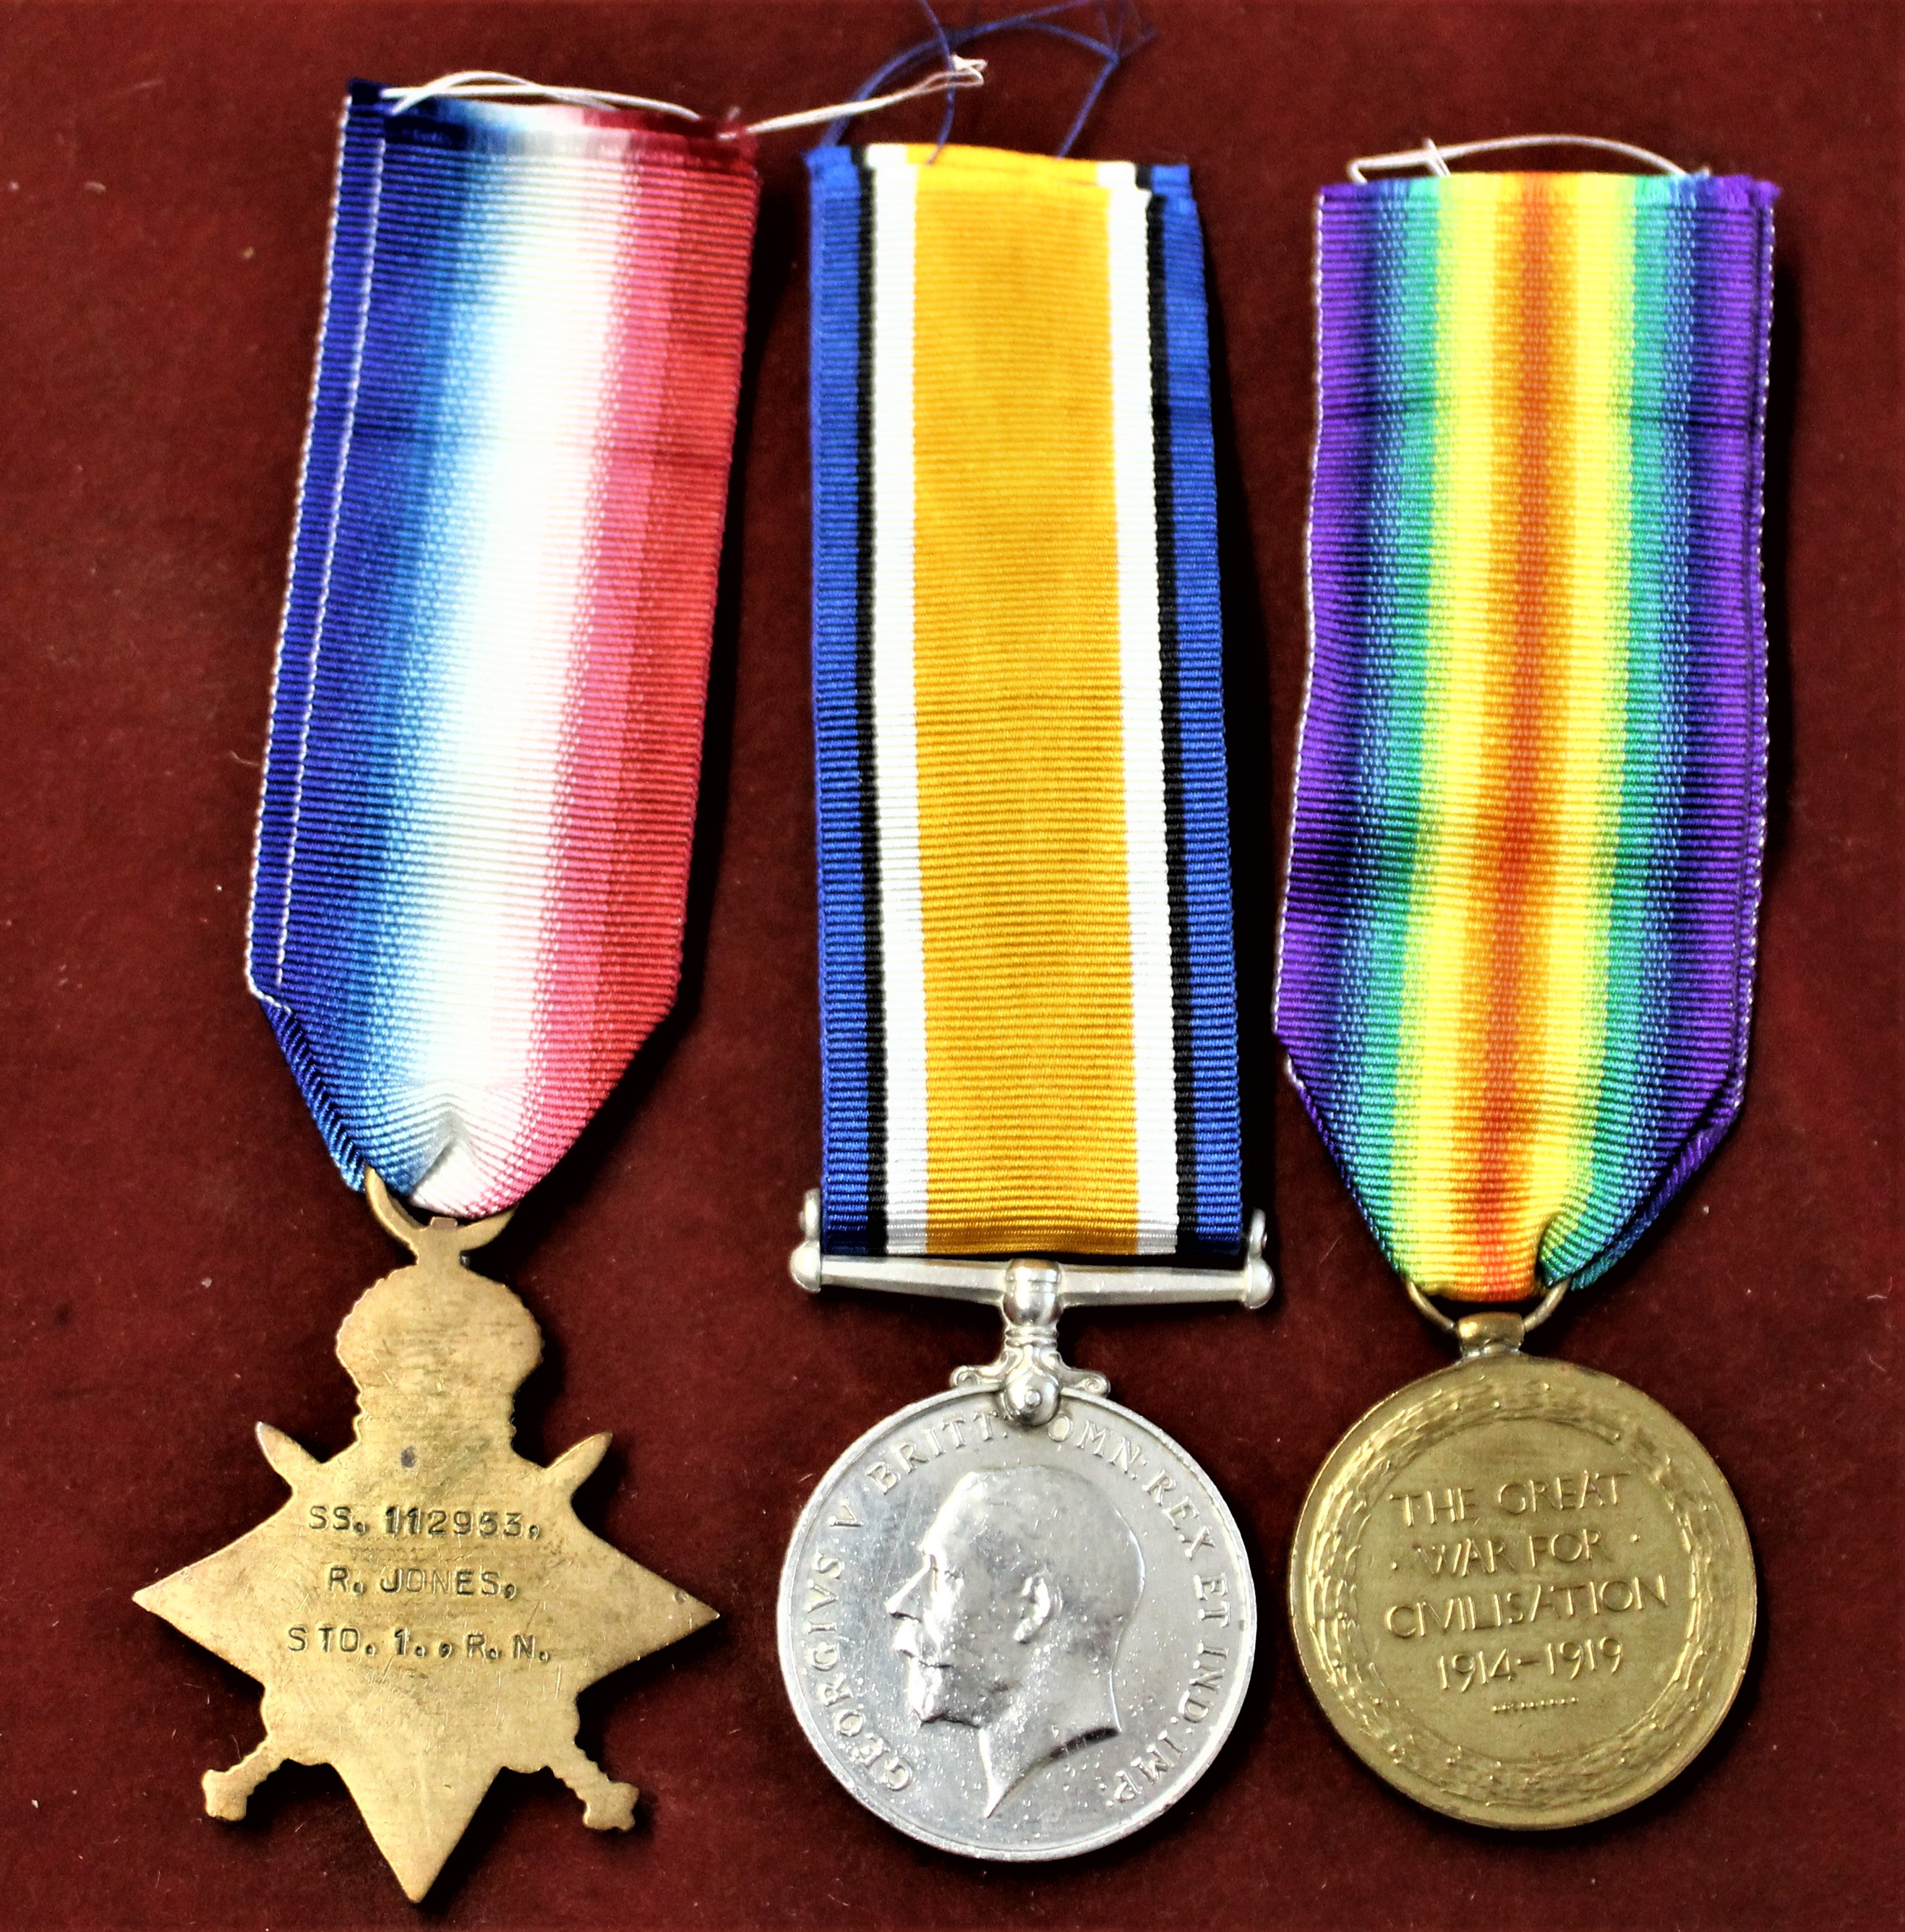 British WWI Trio to SS.112953 R. Jones. Leading Stoker Royal Navy including 1914-15 Star, British - Image 2 of 2